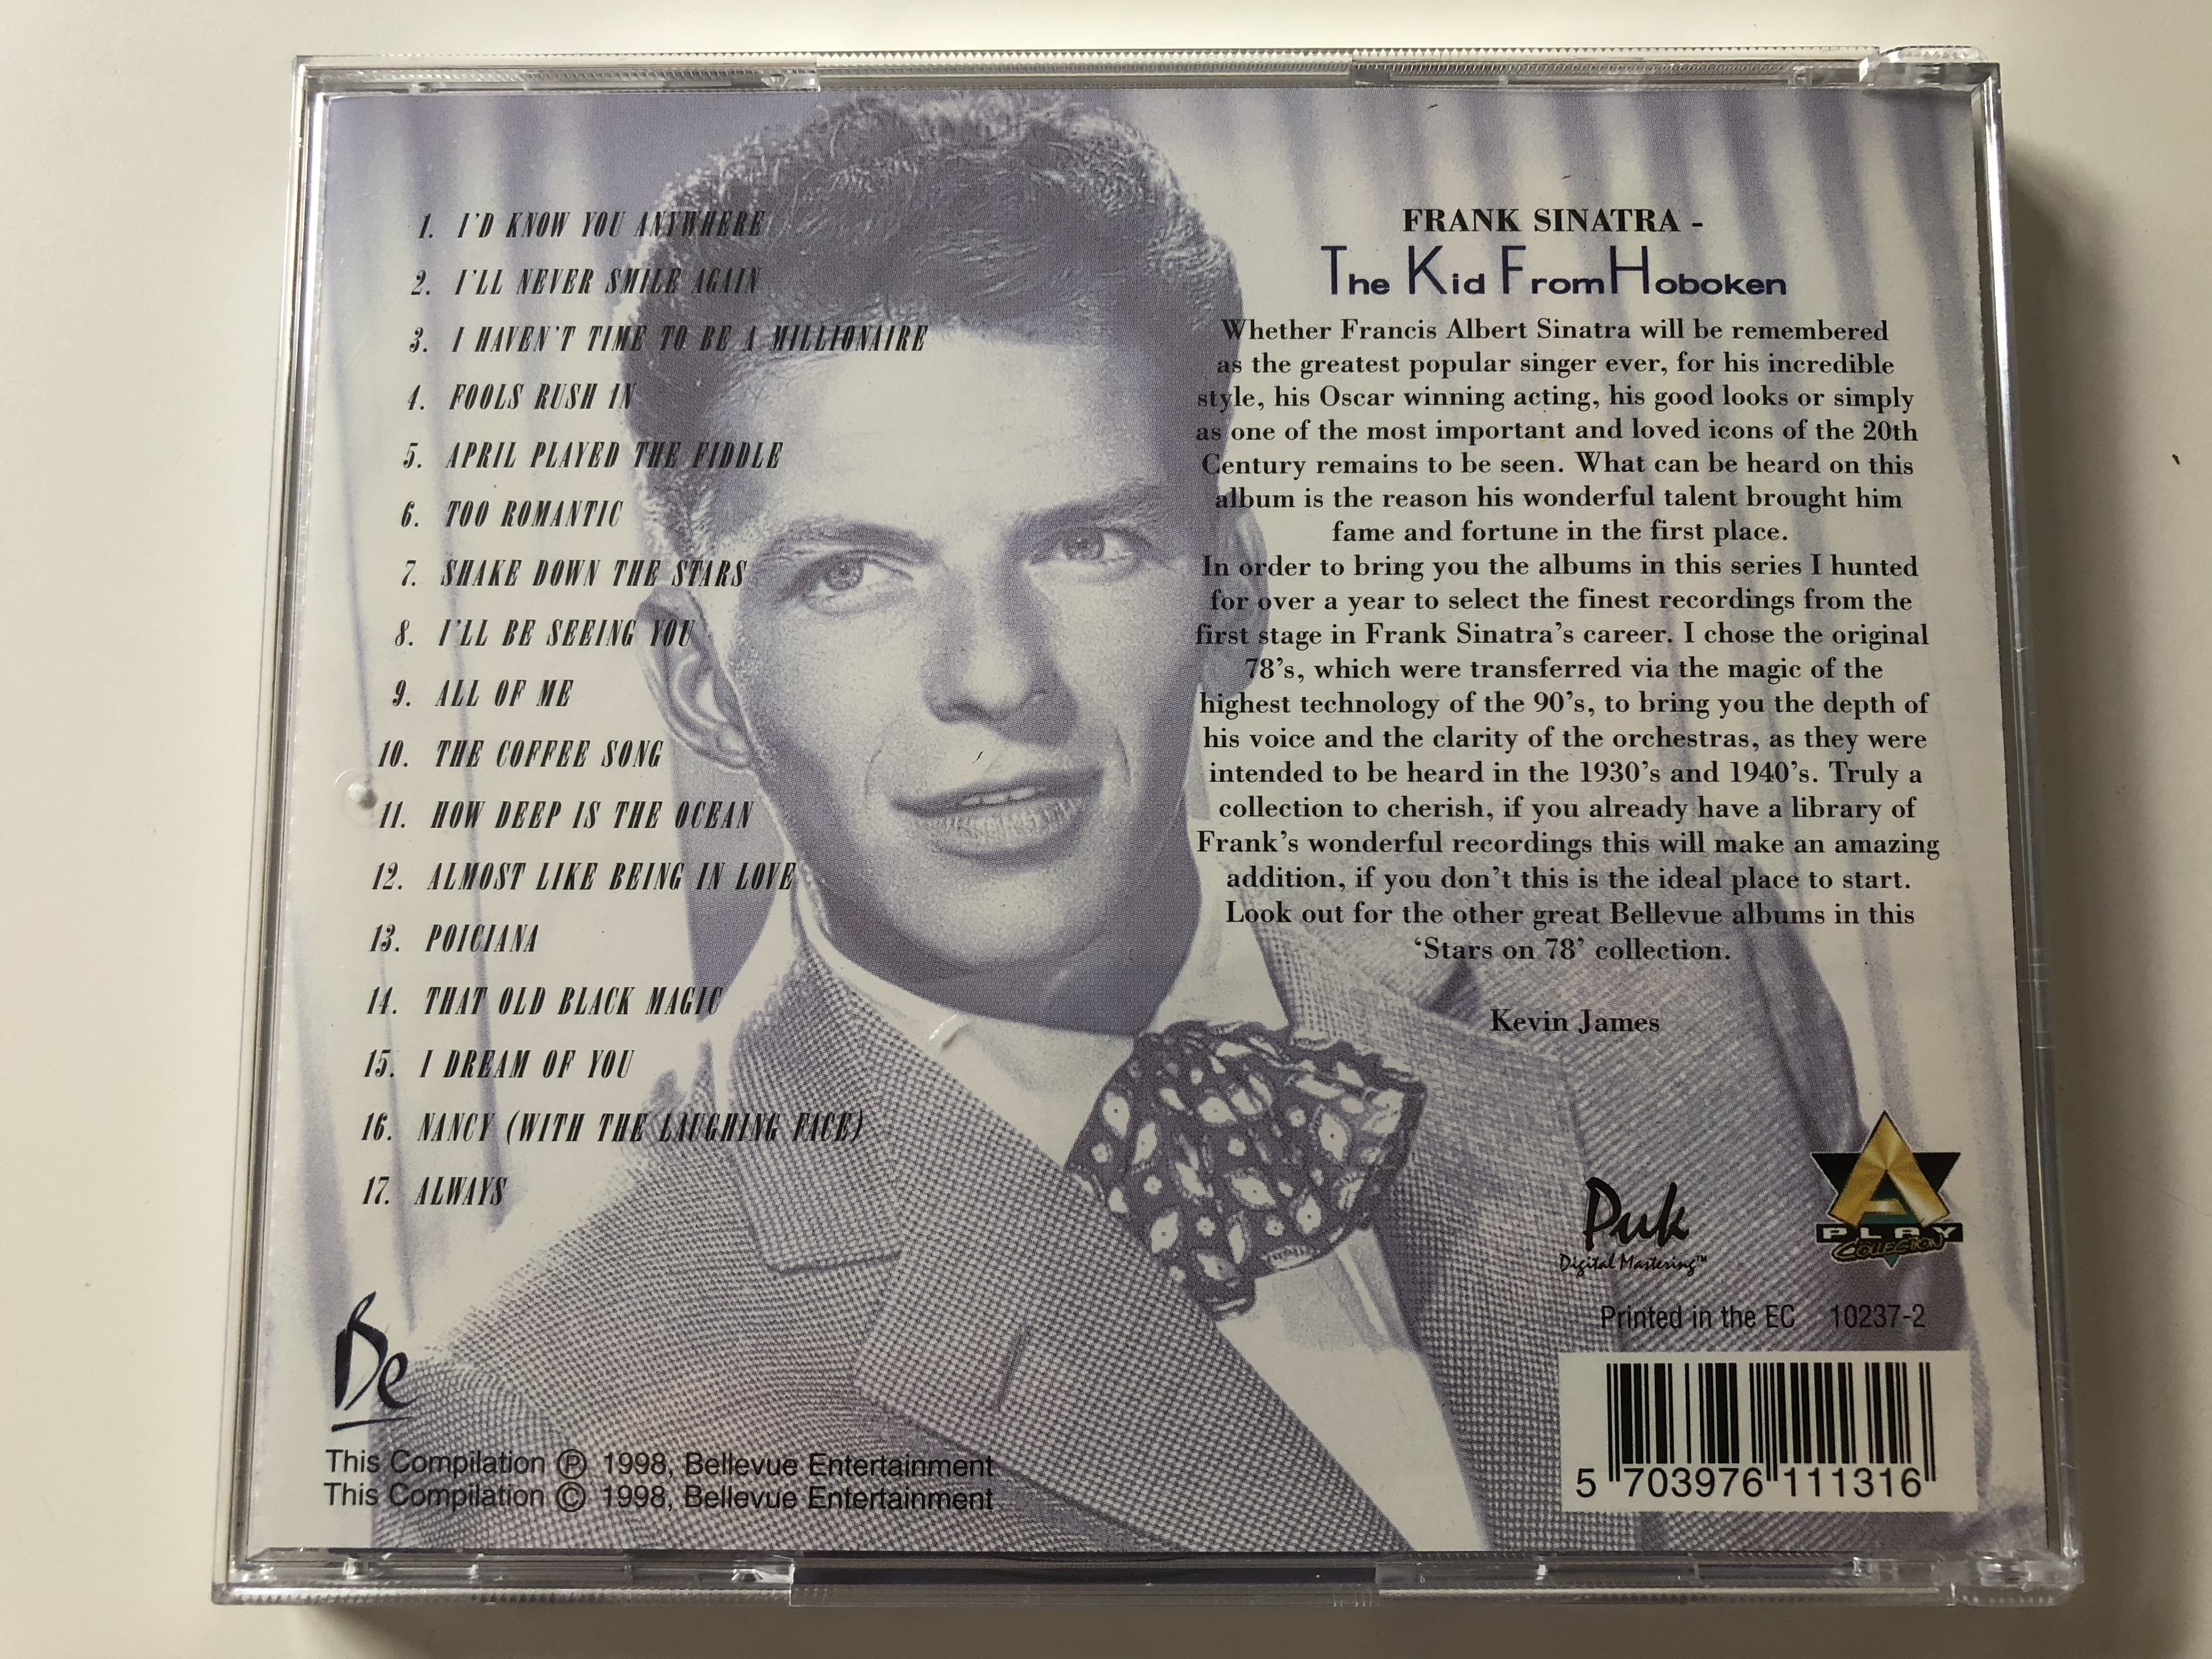 frank-sinatra-the-kid-from-hoboken-nancy-fools-rush-in-the-coffee-song-that-old-black-magic-bellevue-entertainment-audio-cd-1998-10237-2-4-.jpg